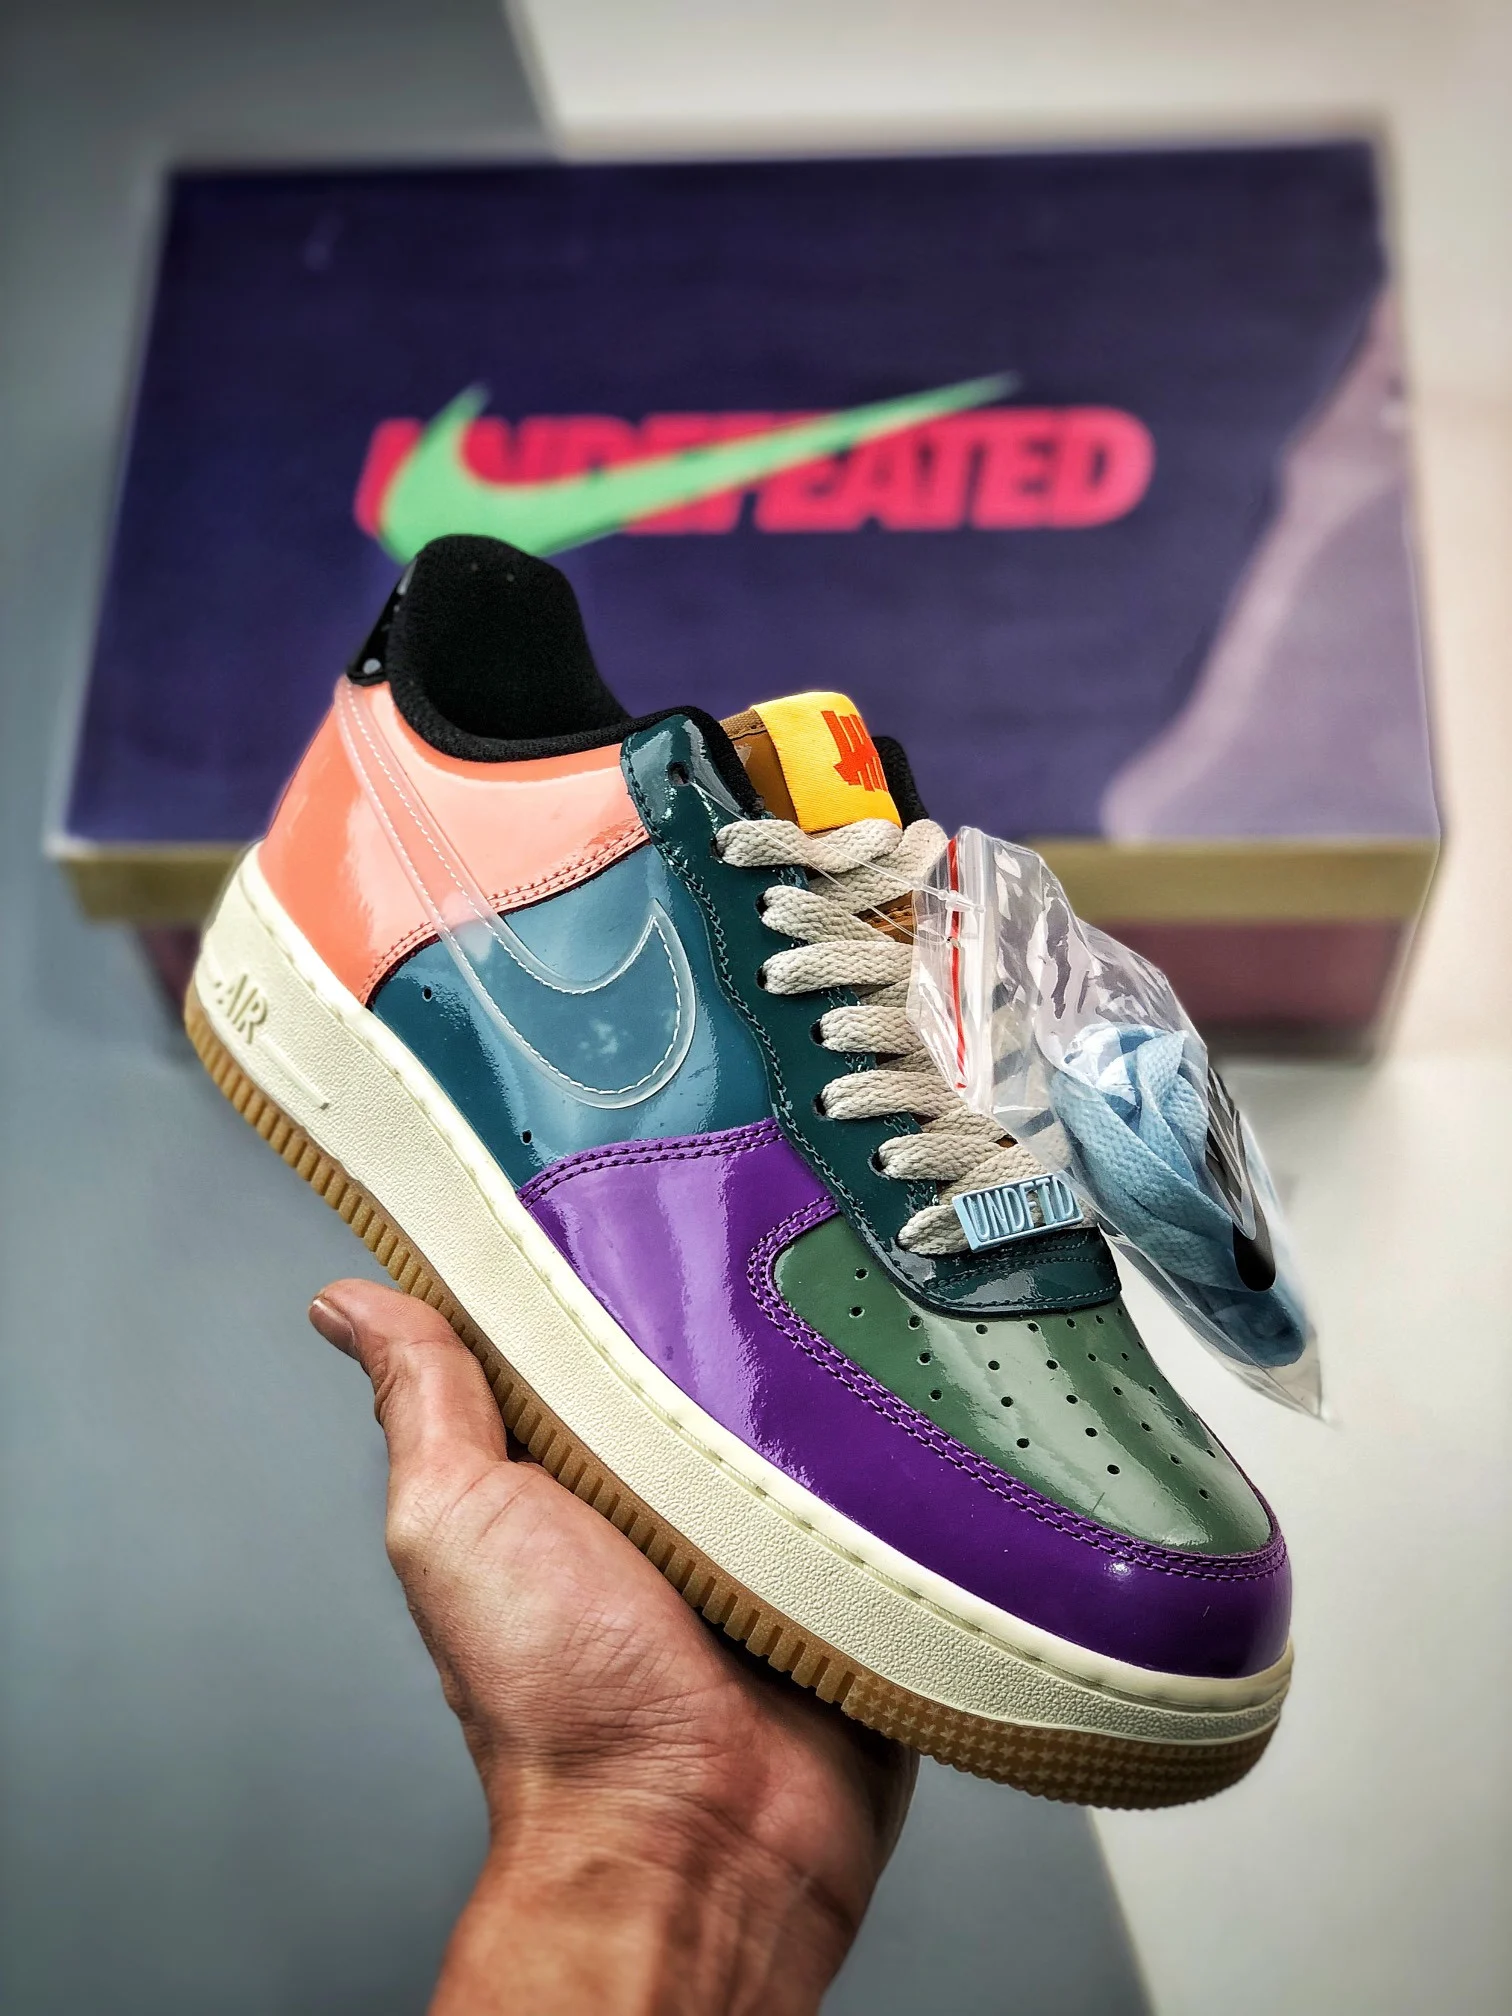 Undefeated x Nike Air Force 1 Low Wild Berry DV5255-500 For Sale